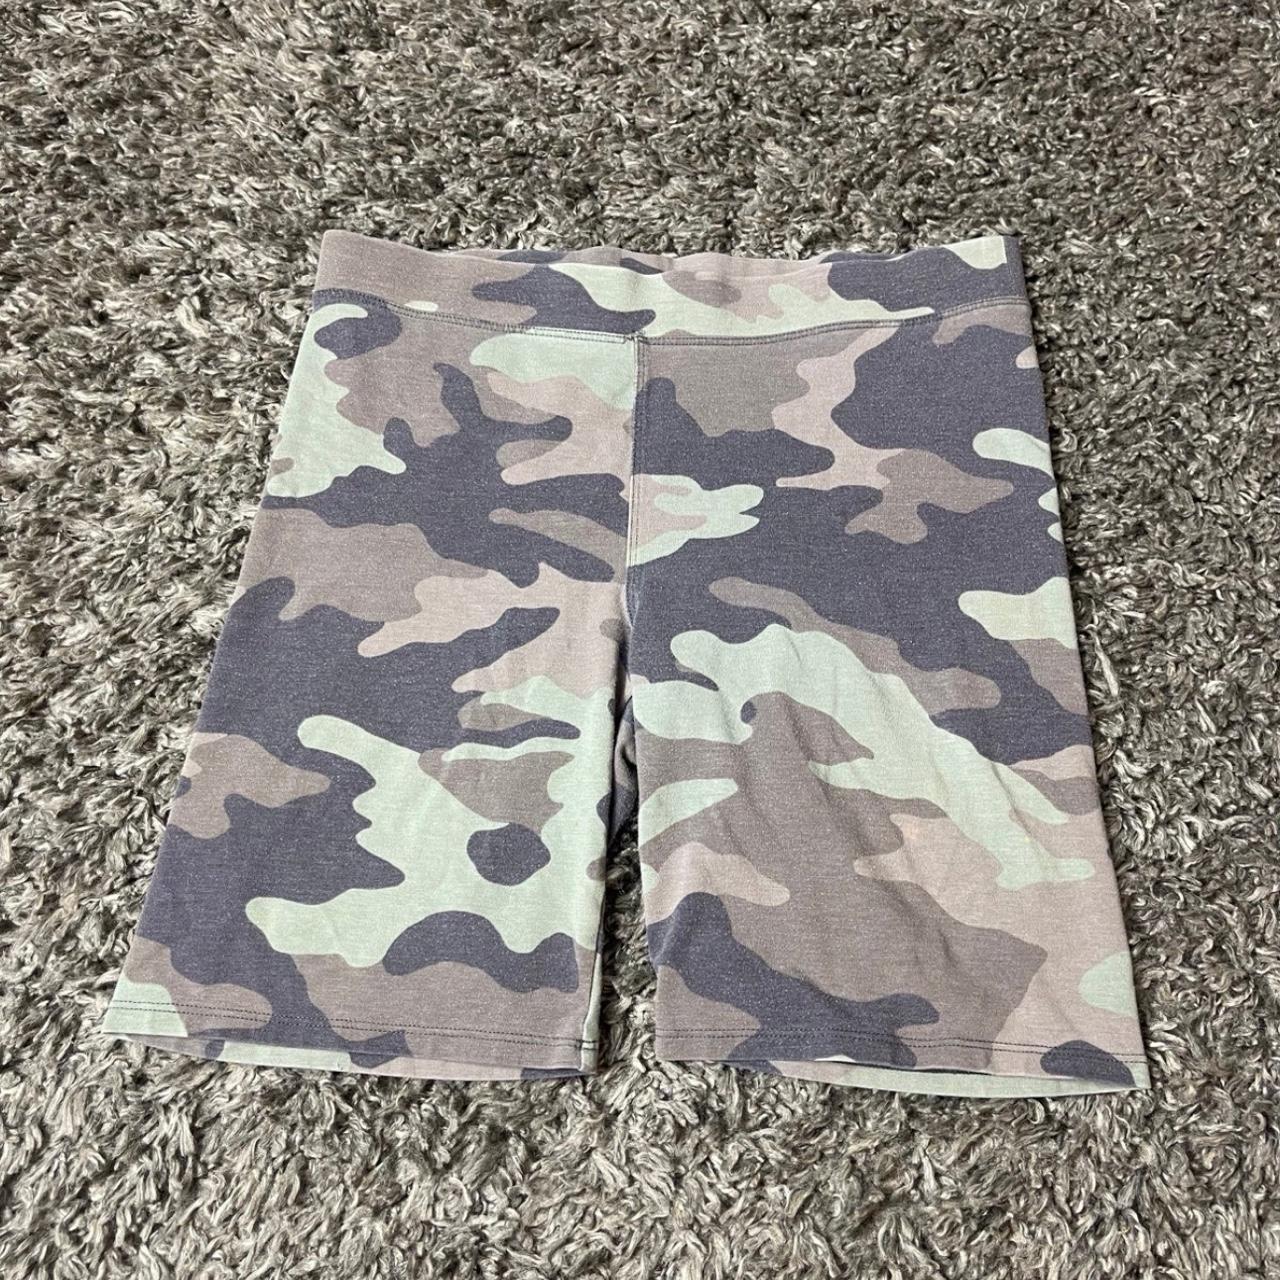 Gymshark pink camo shorts. Size small. Great - Depop